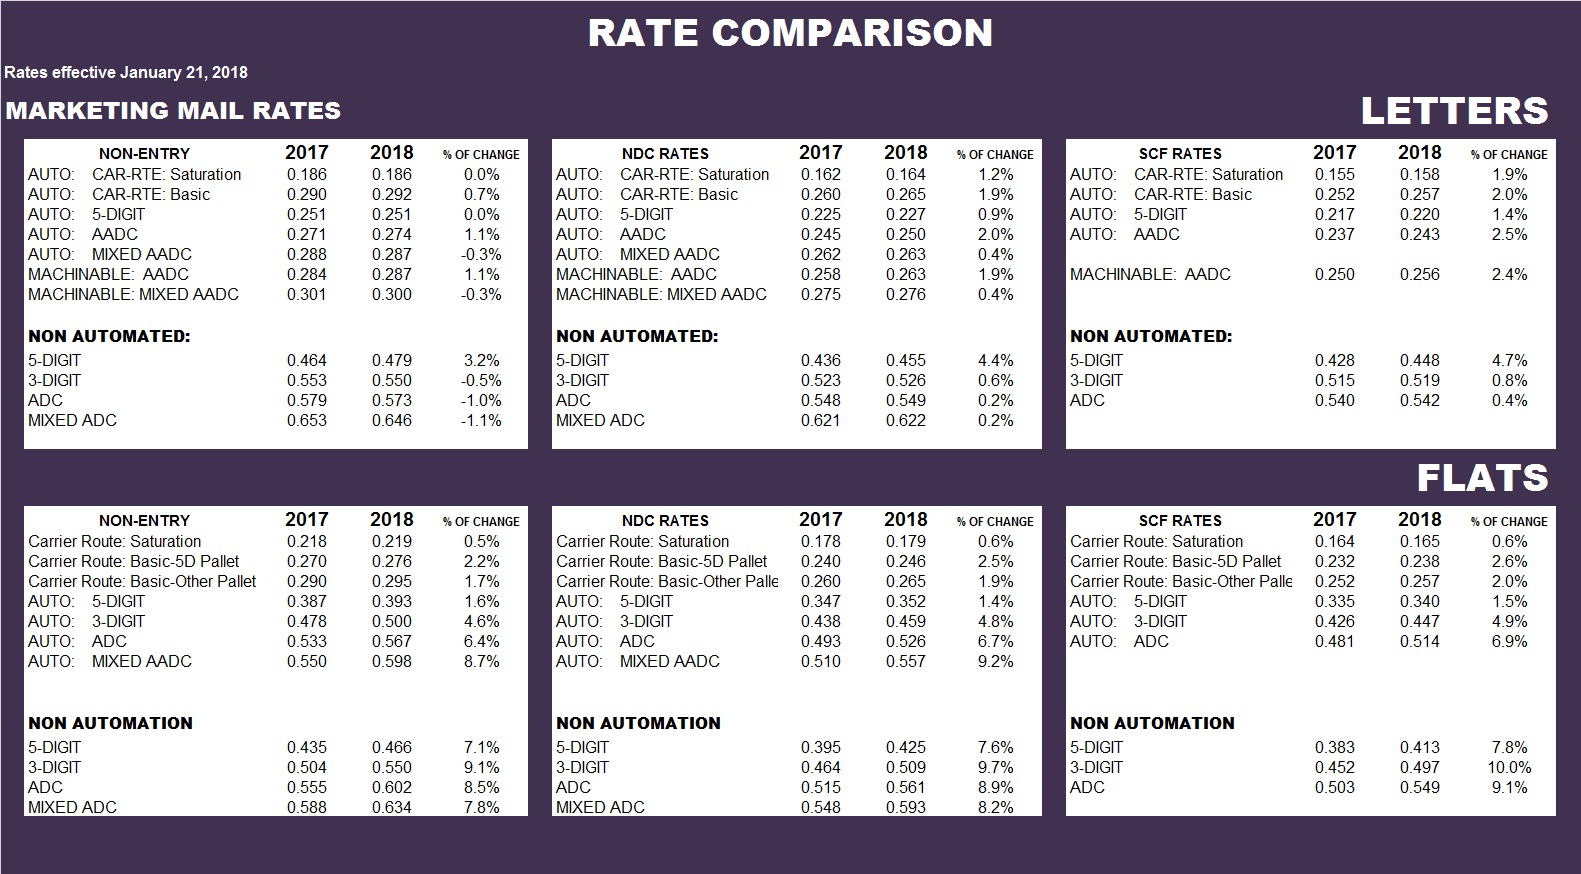 USPS Rate Comparison Marketing Mail | BEBTEXAS